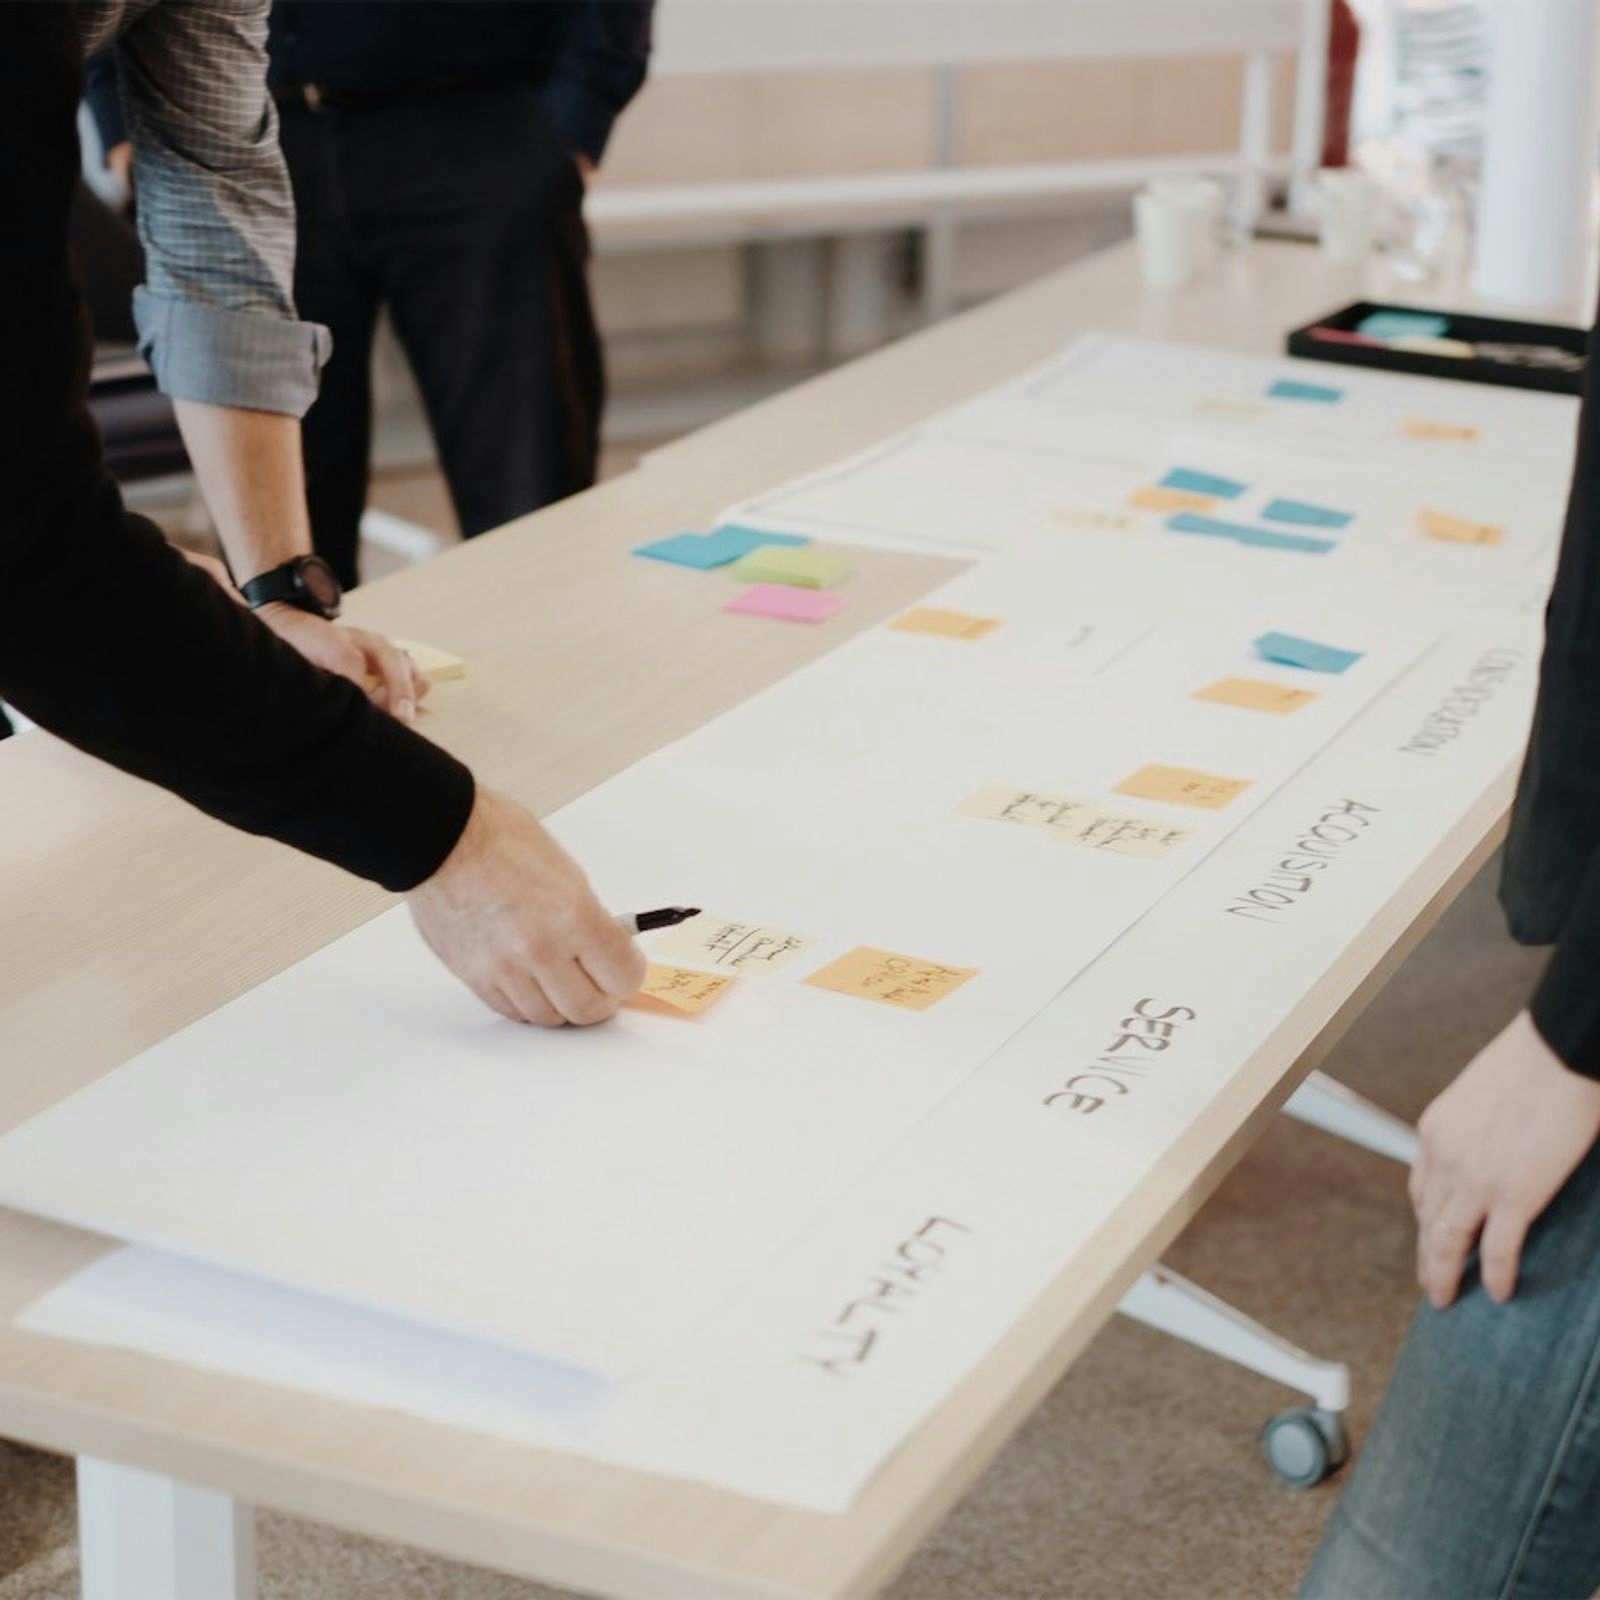 We Design Sprint to create products effectively